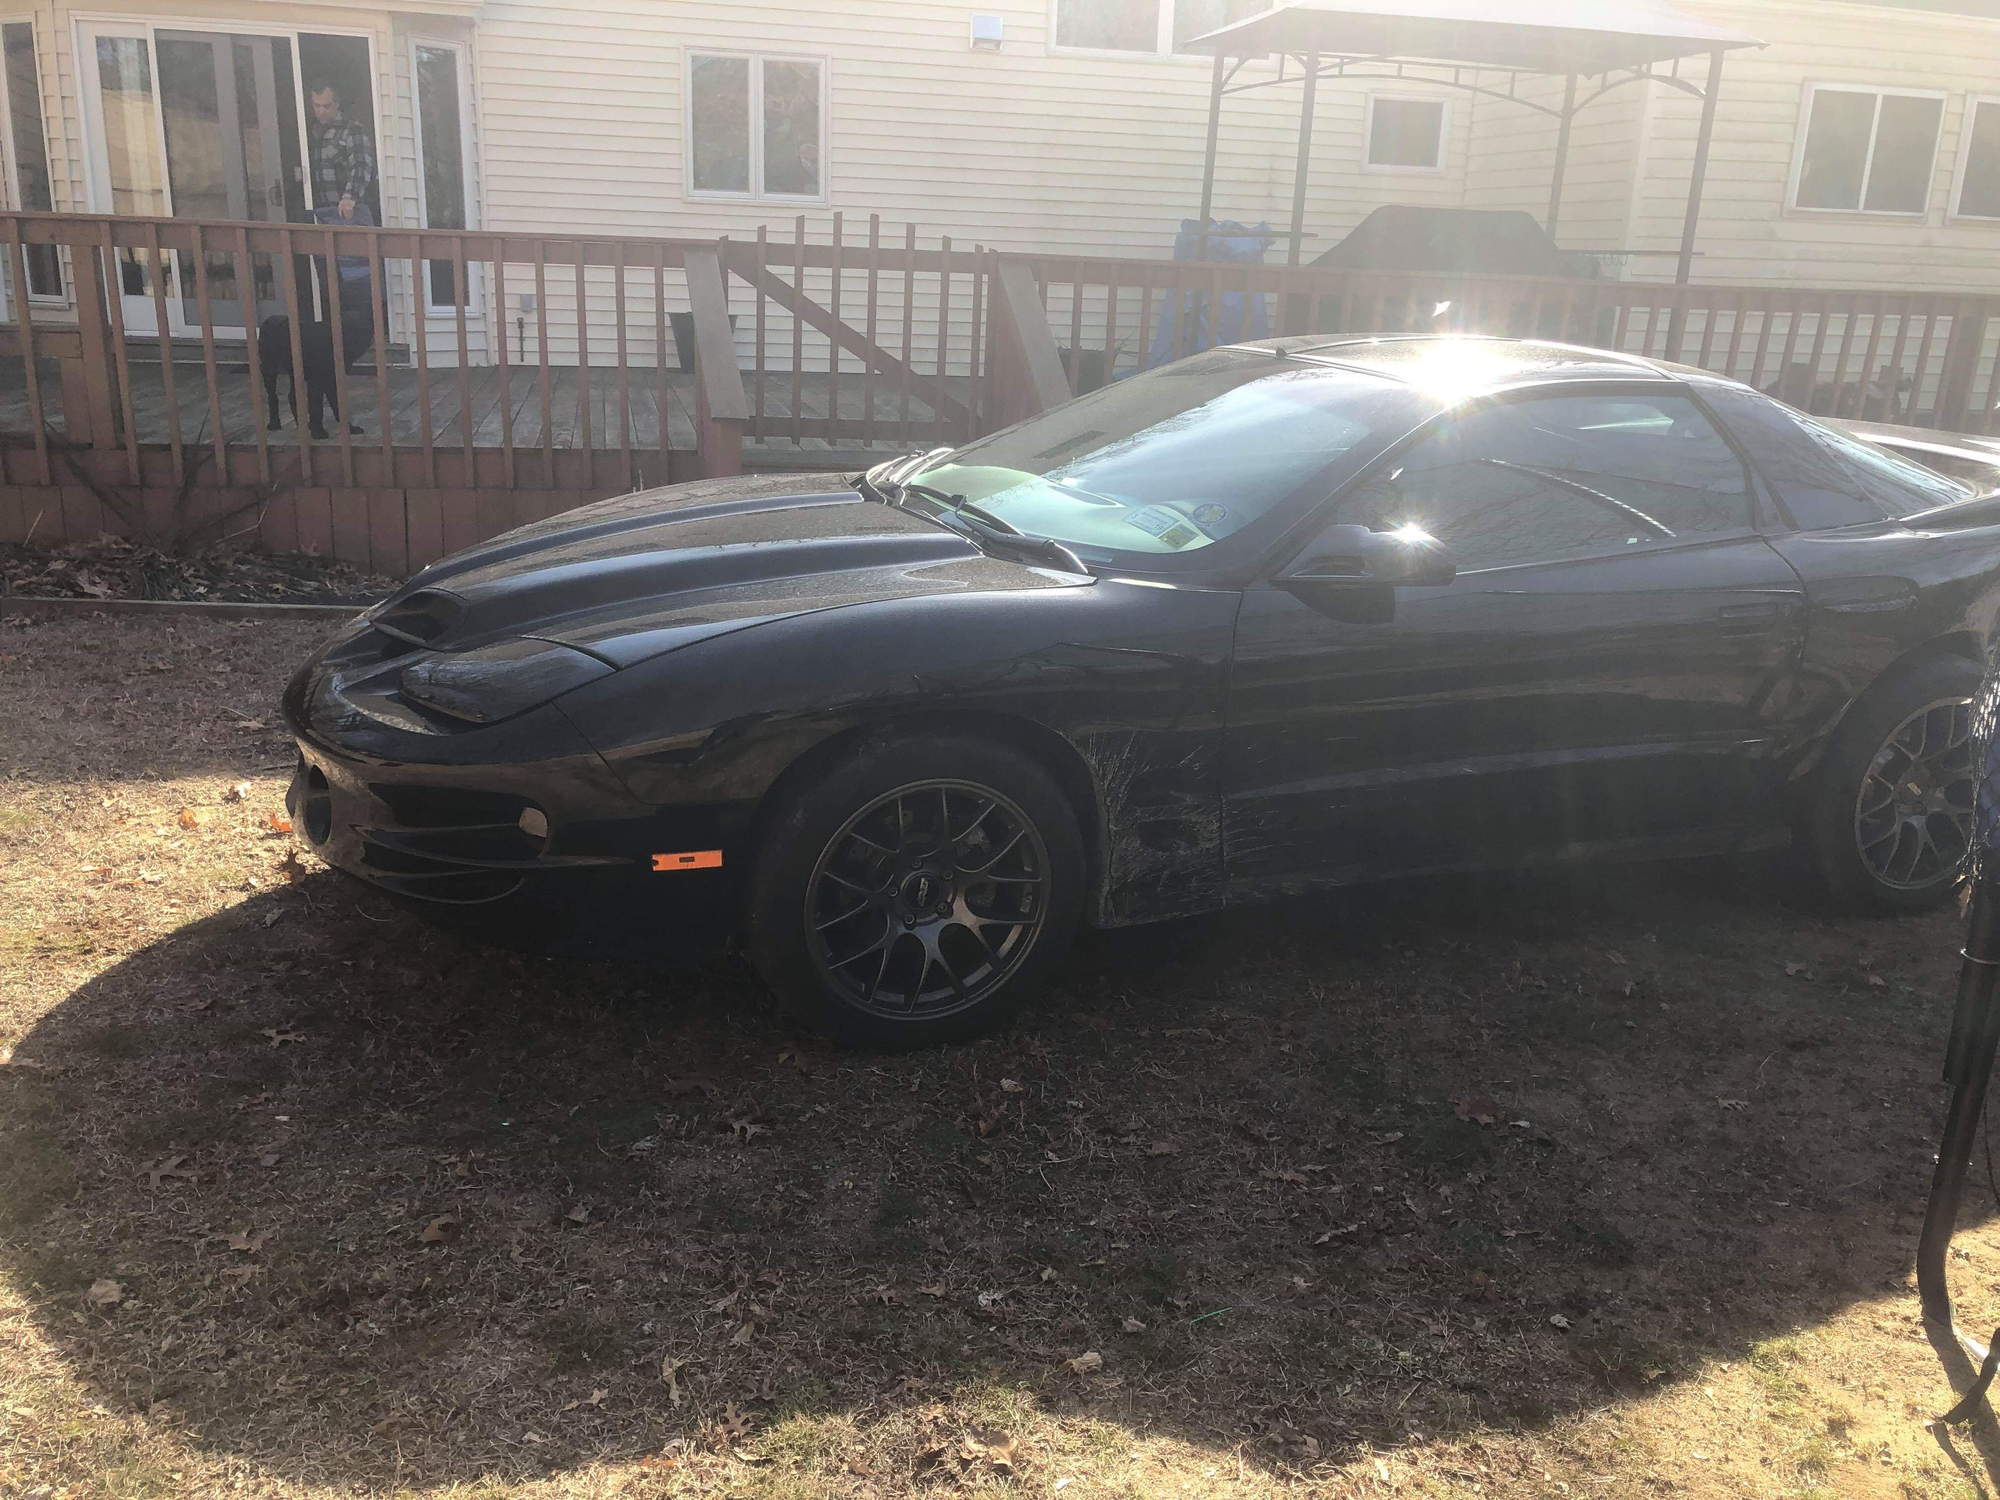 2002 Pontiac Firebird - 1999 Trans Am Full Part Out ***Updated - Smithtown, NY 11787, United States